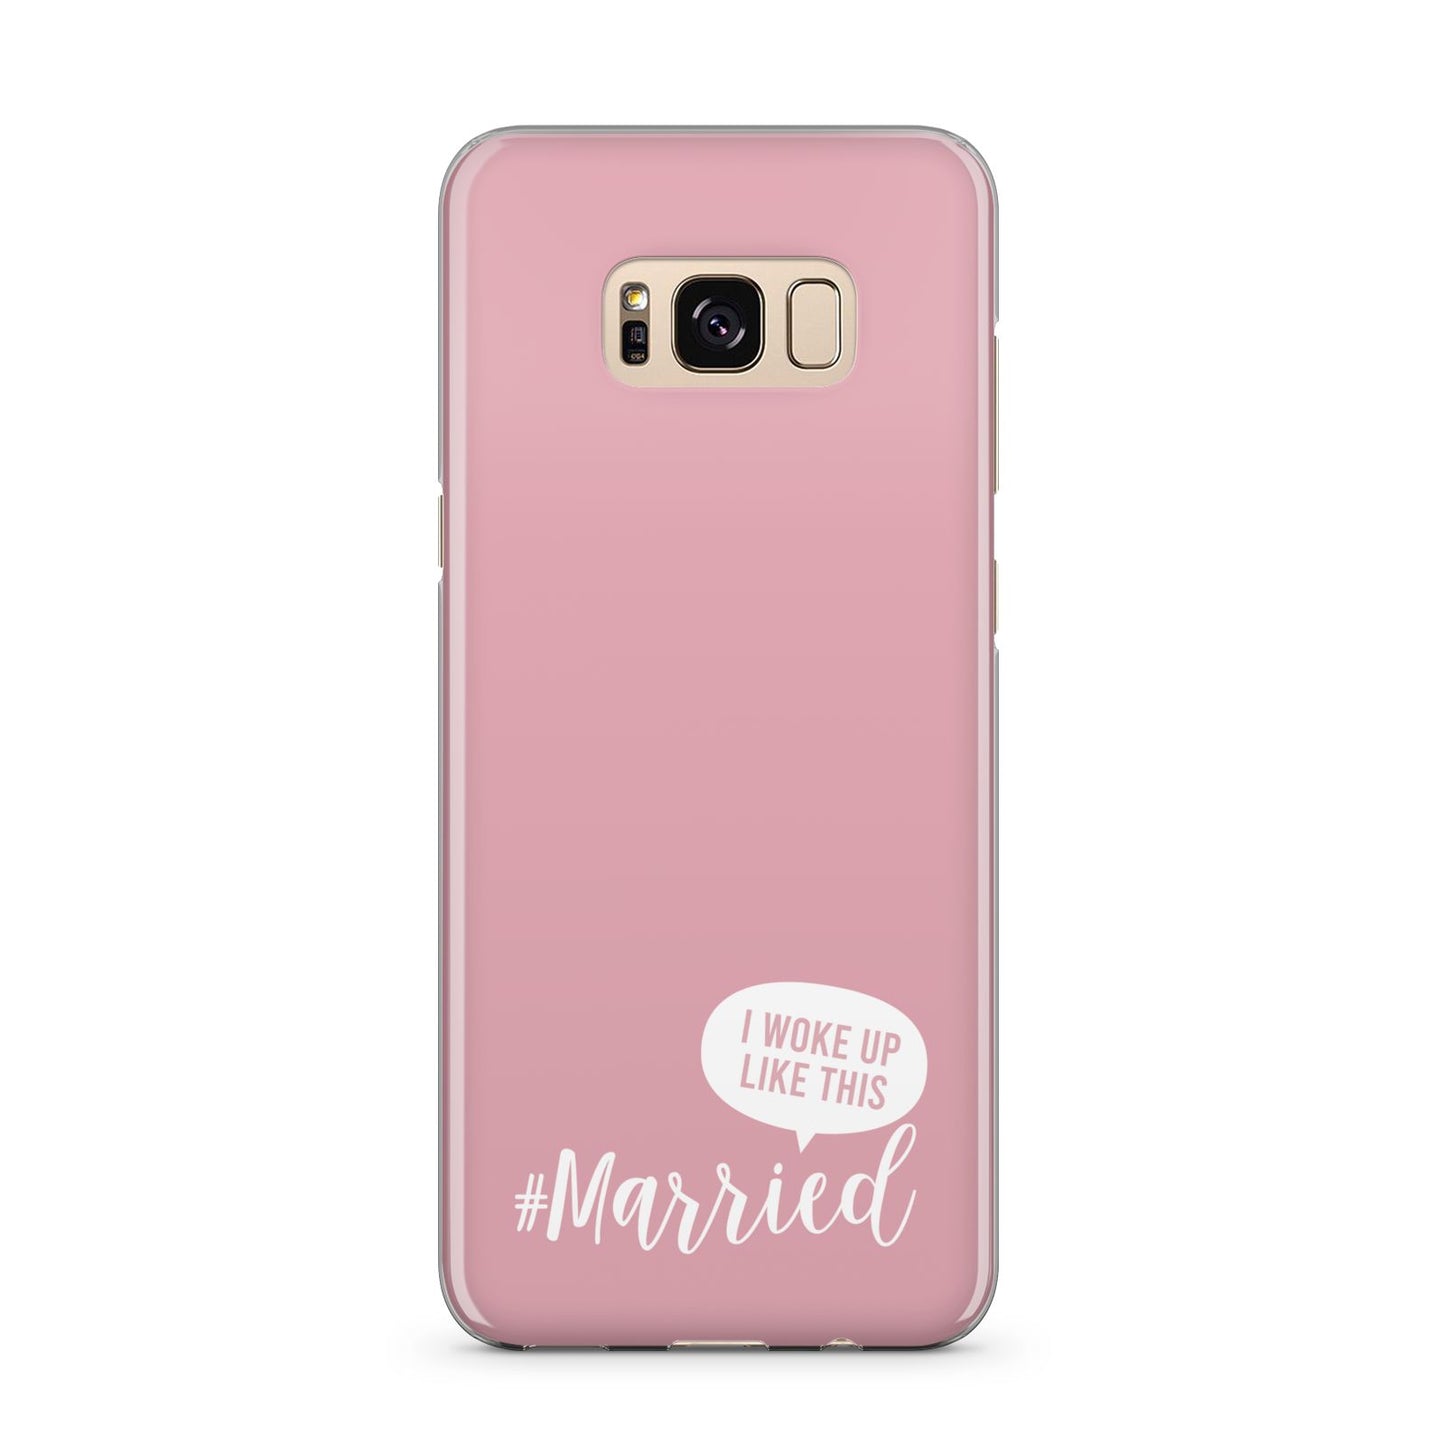 I Woke Up Like This Married Samsung Galaxy S8 Plus Case